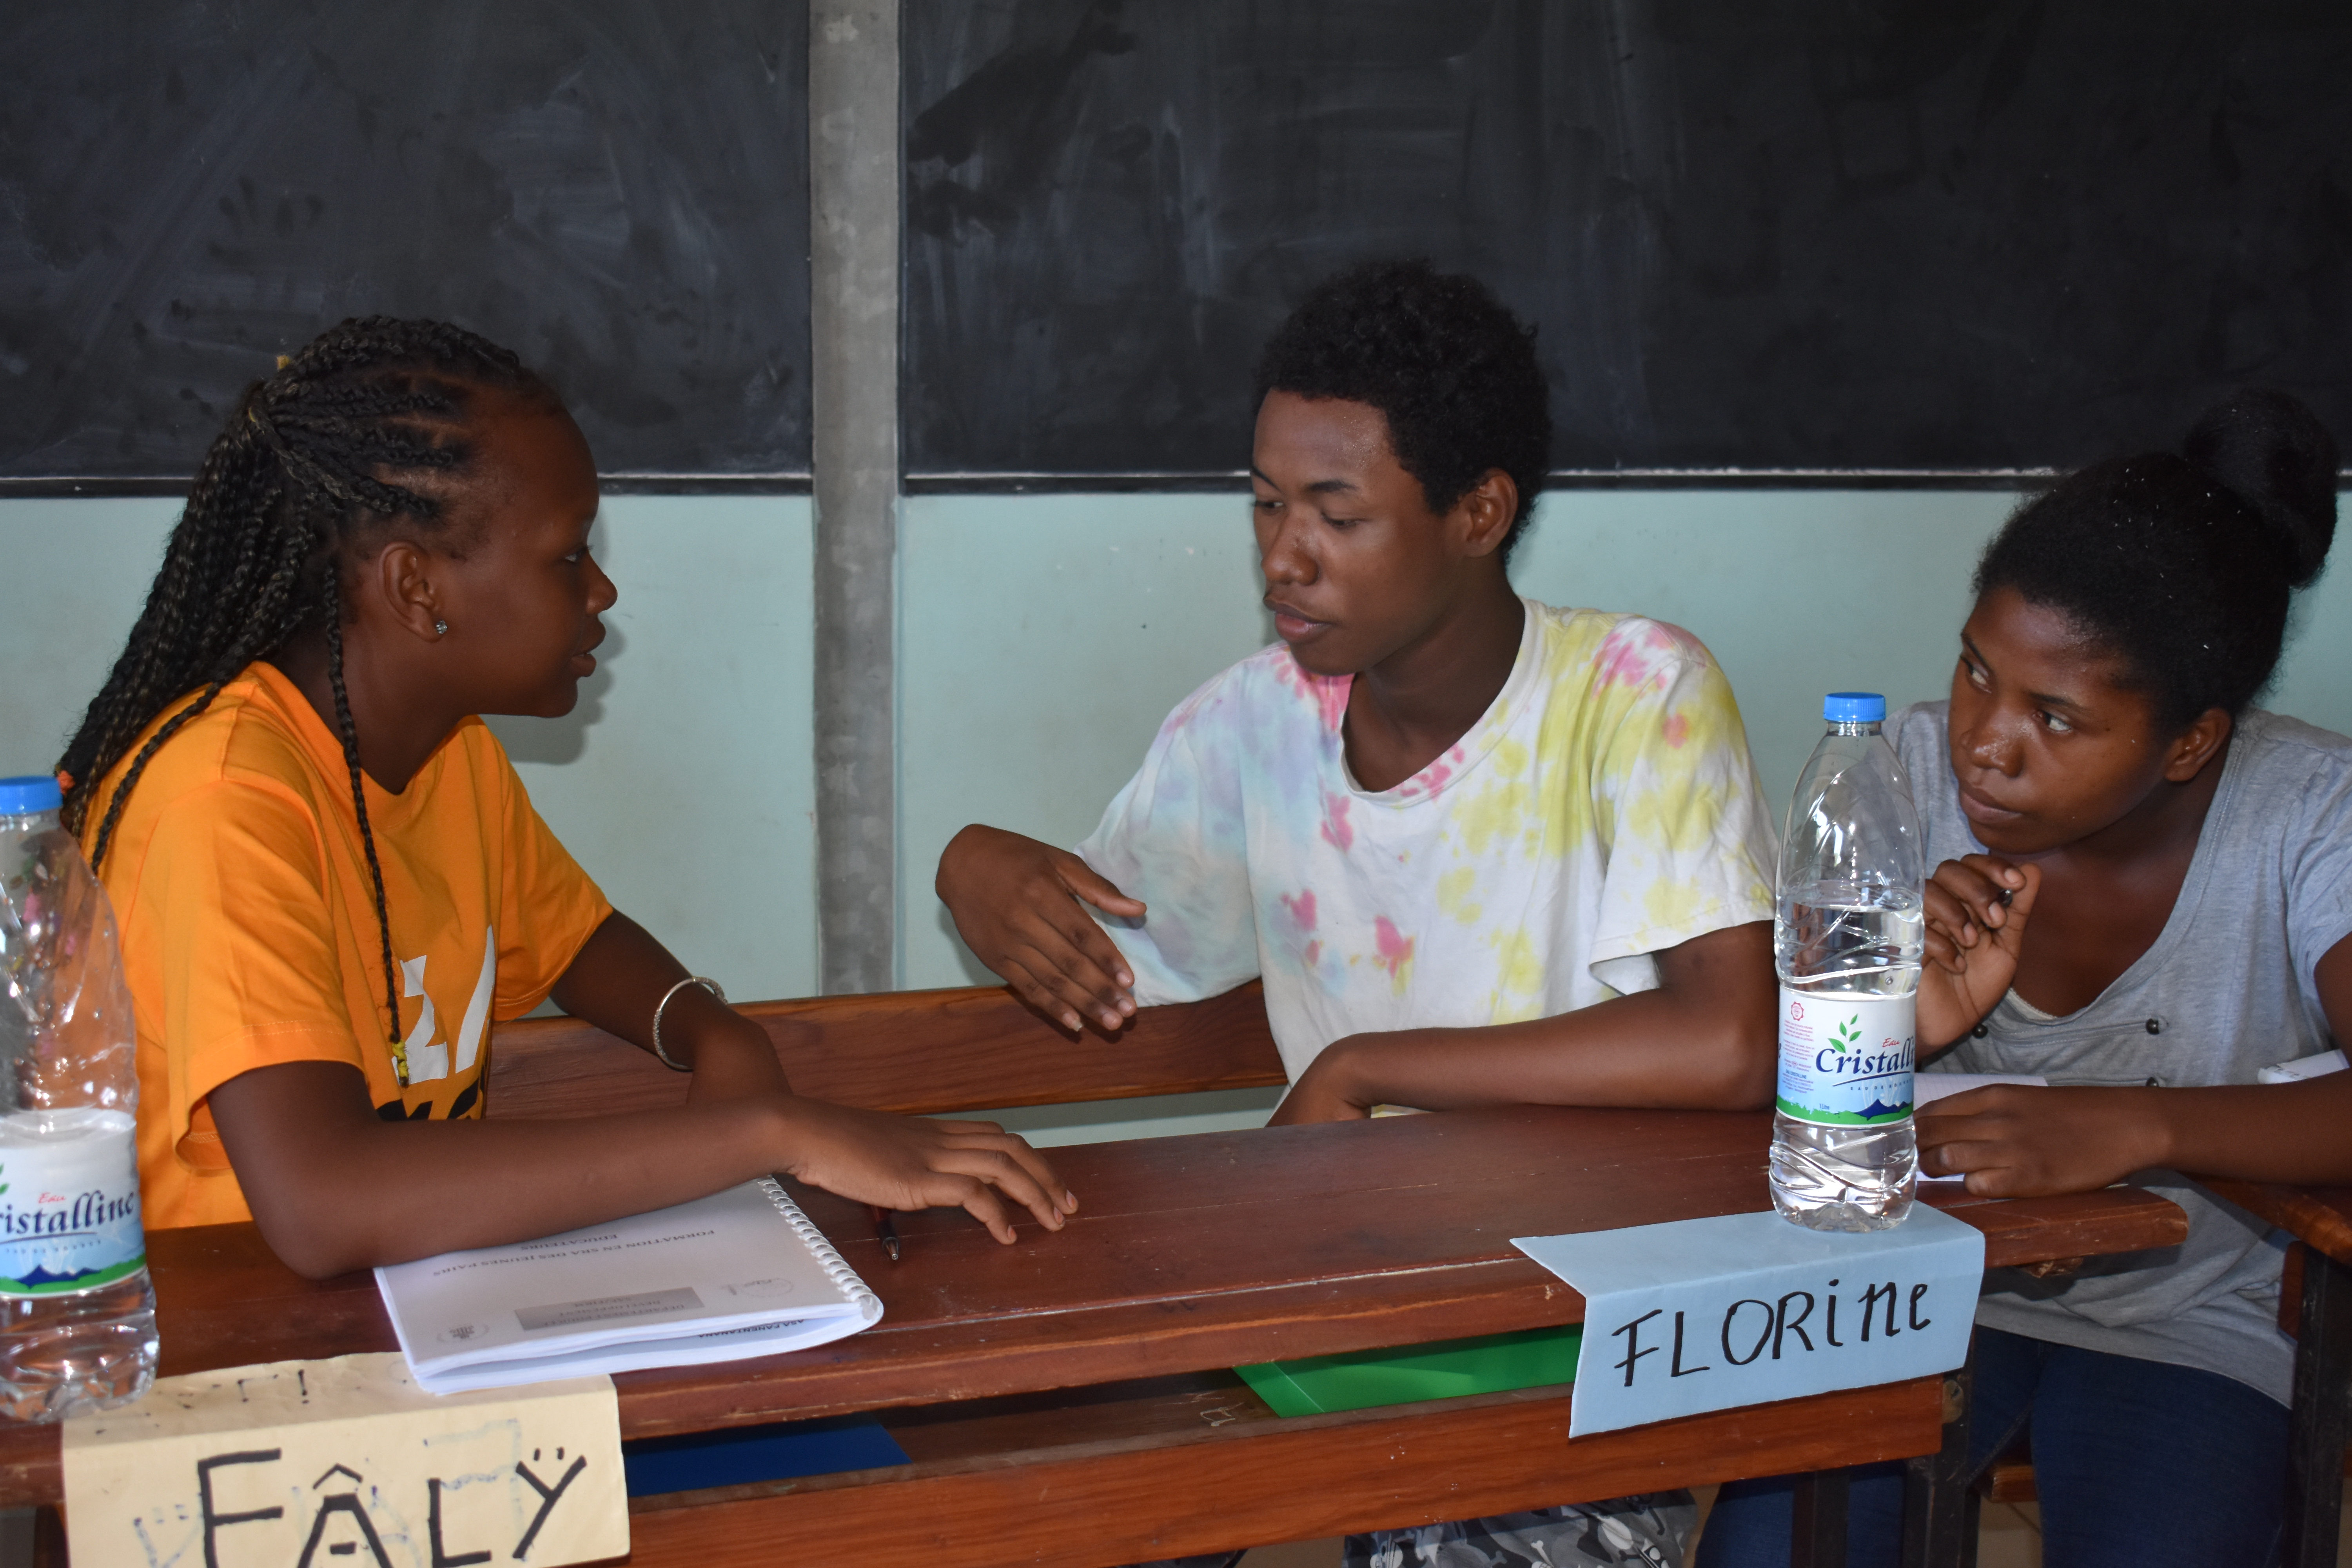 Youth peer educators practicing one-on-one sharing during training.